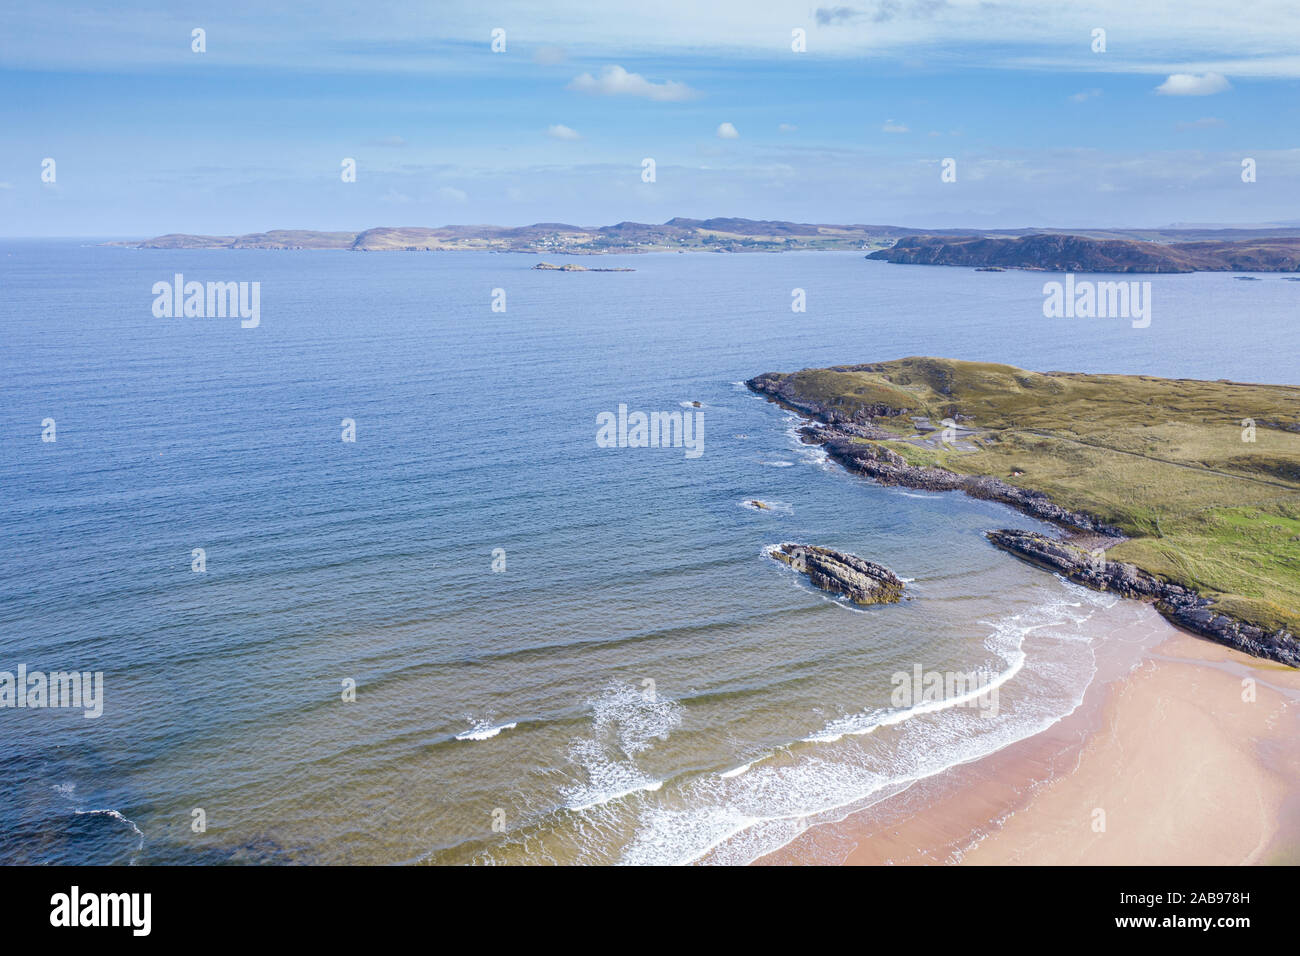 High altitude drone view over Firemore Beach looking towards Island of Ewe in the Northwest Highlands of Scotland - NC500 route Stock Photo